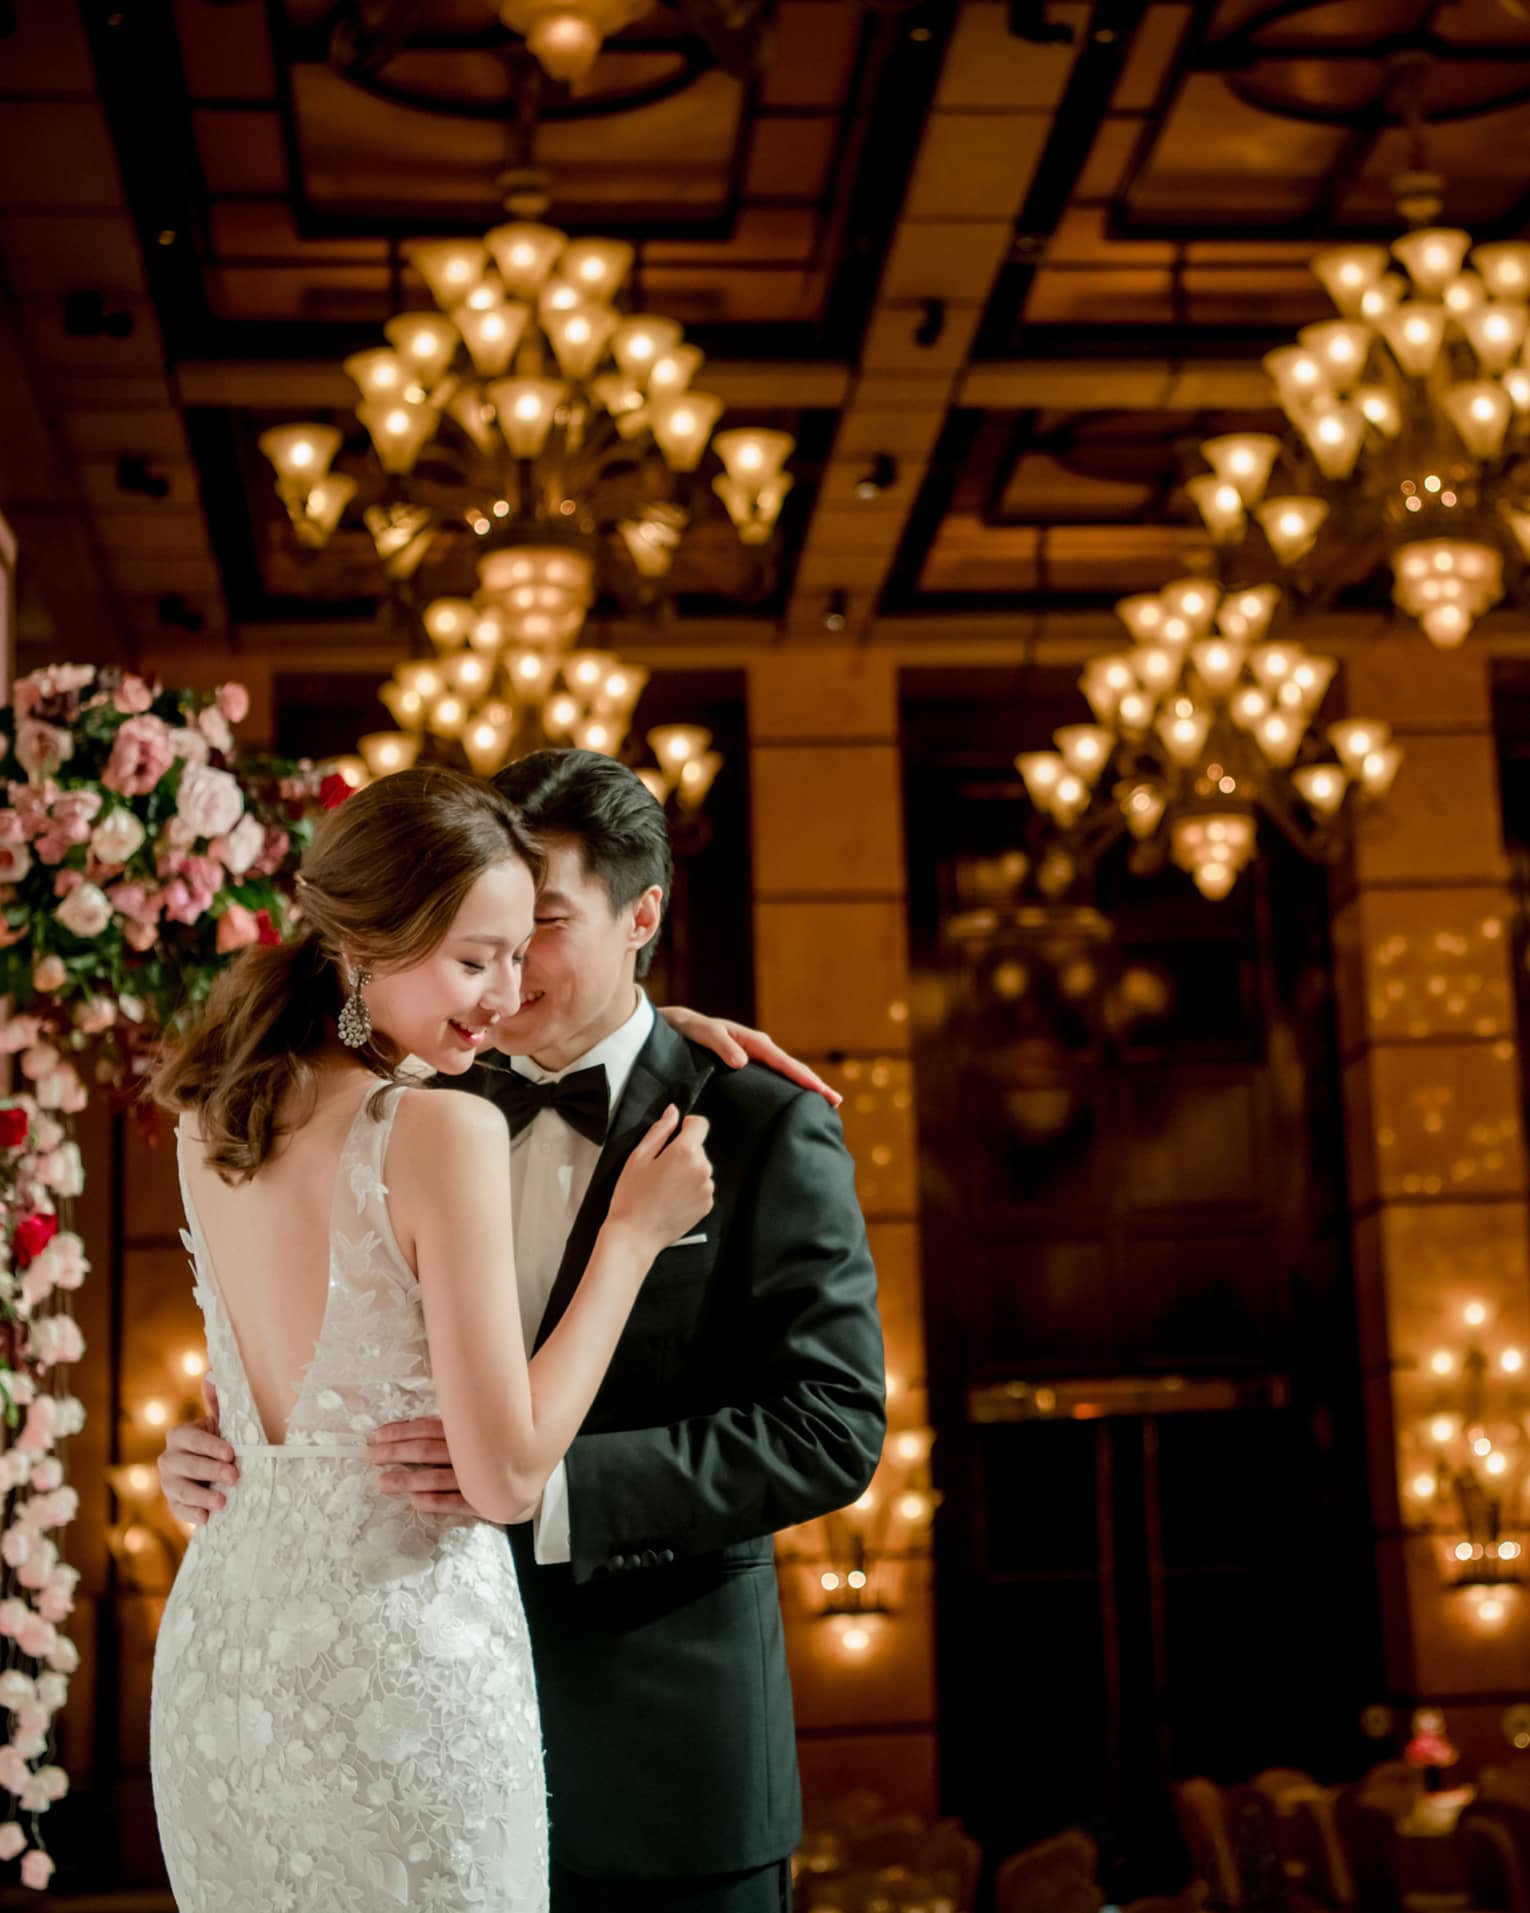 Bride and groom embrace at wedding ceremony in banquet room with lights